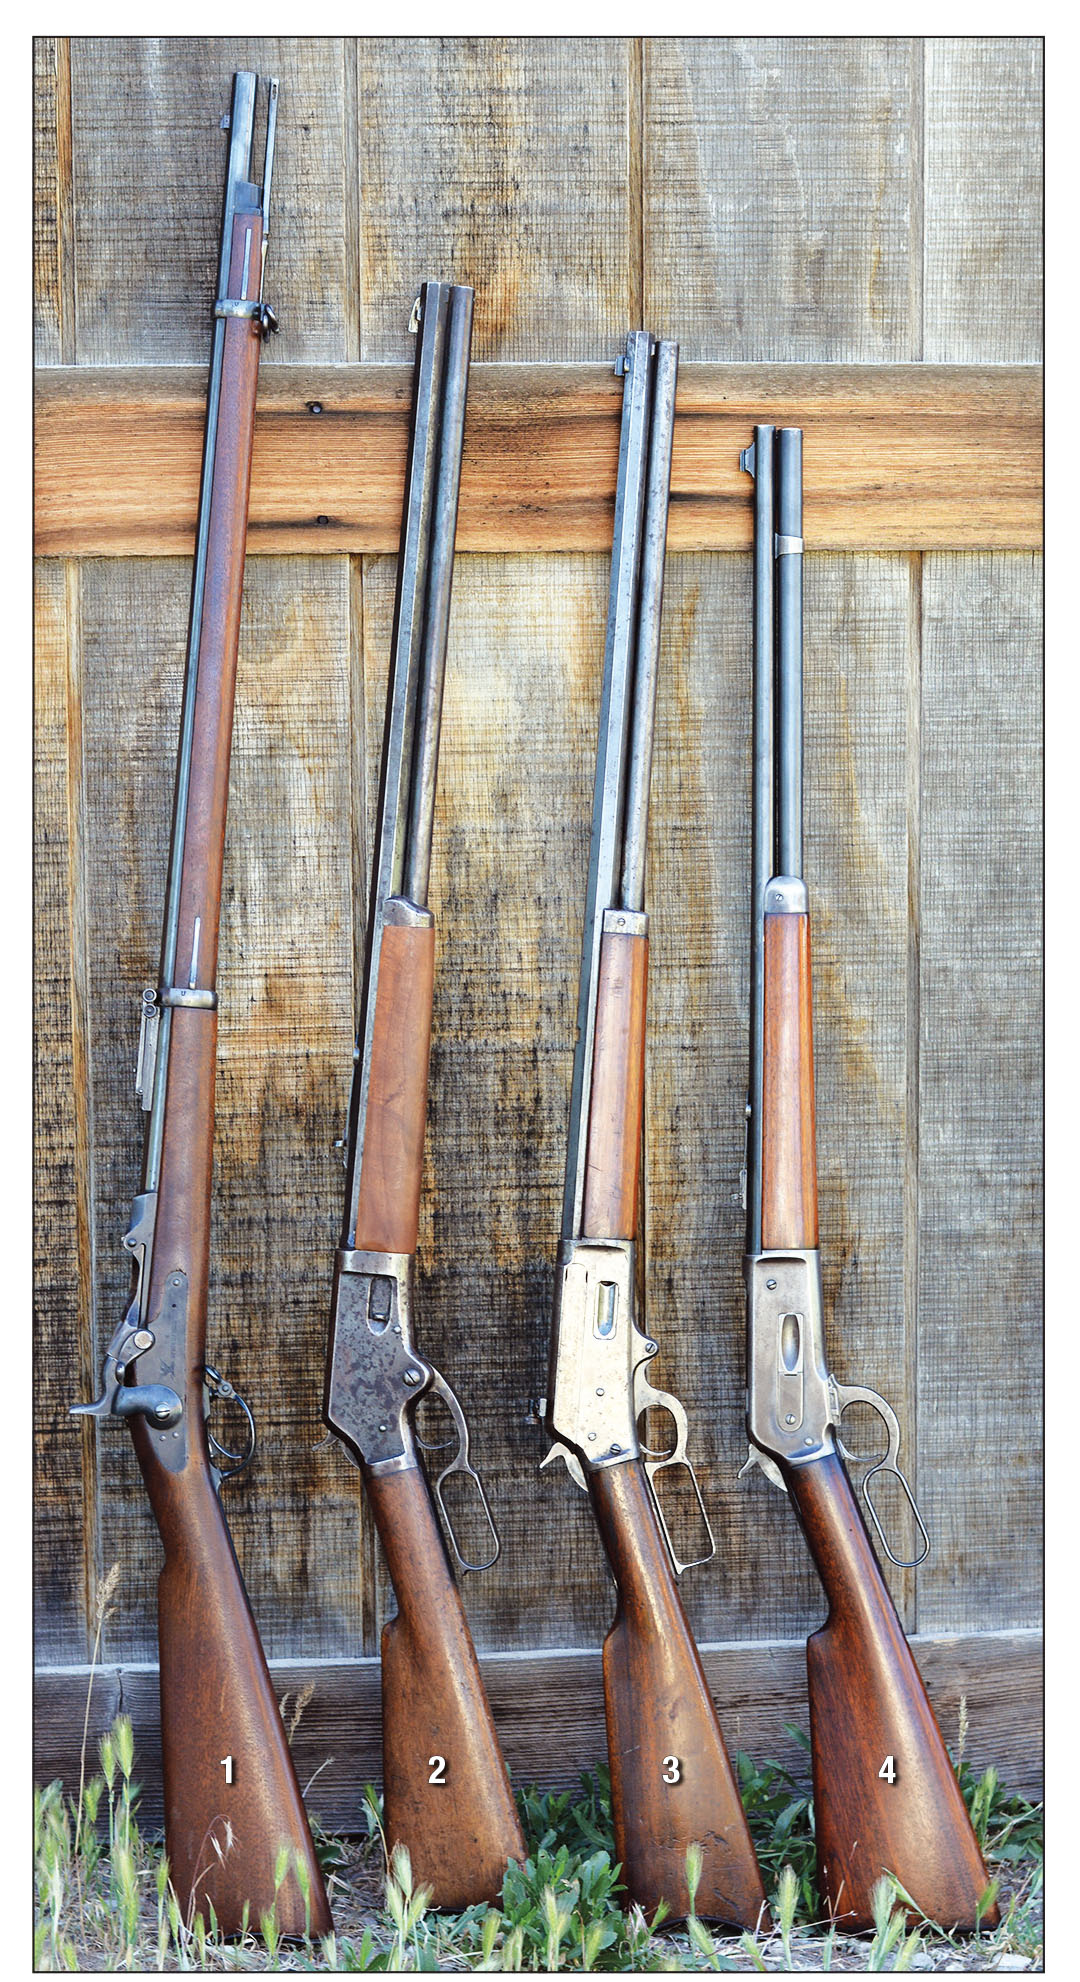 These period .45-70 rifles include the (1) U.S. Springfield 1873 Trapdoor, (2) Marlin Model 1881, (3) Marlin Model 1895 (an original) and (4) Winchester Model 1886.